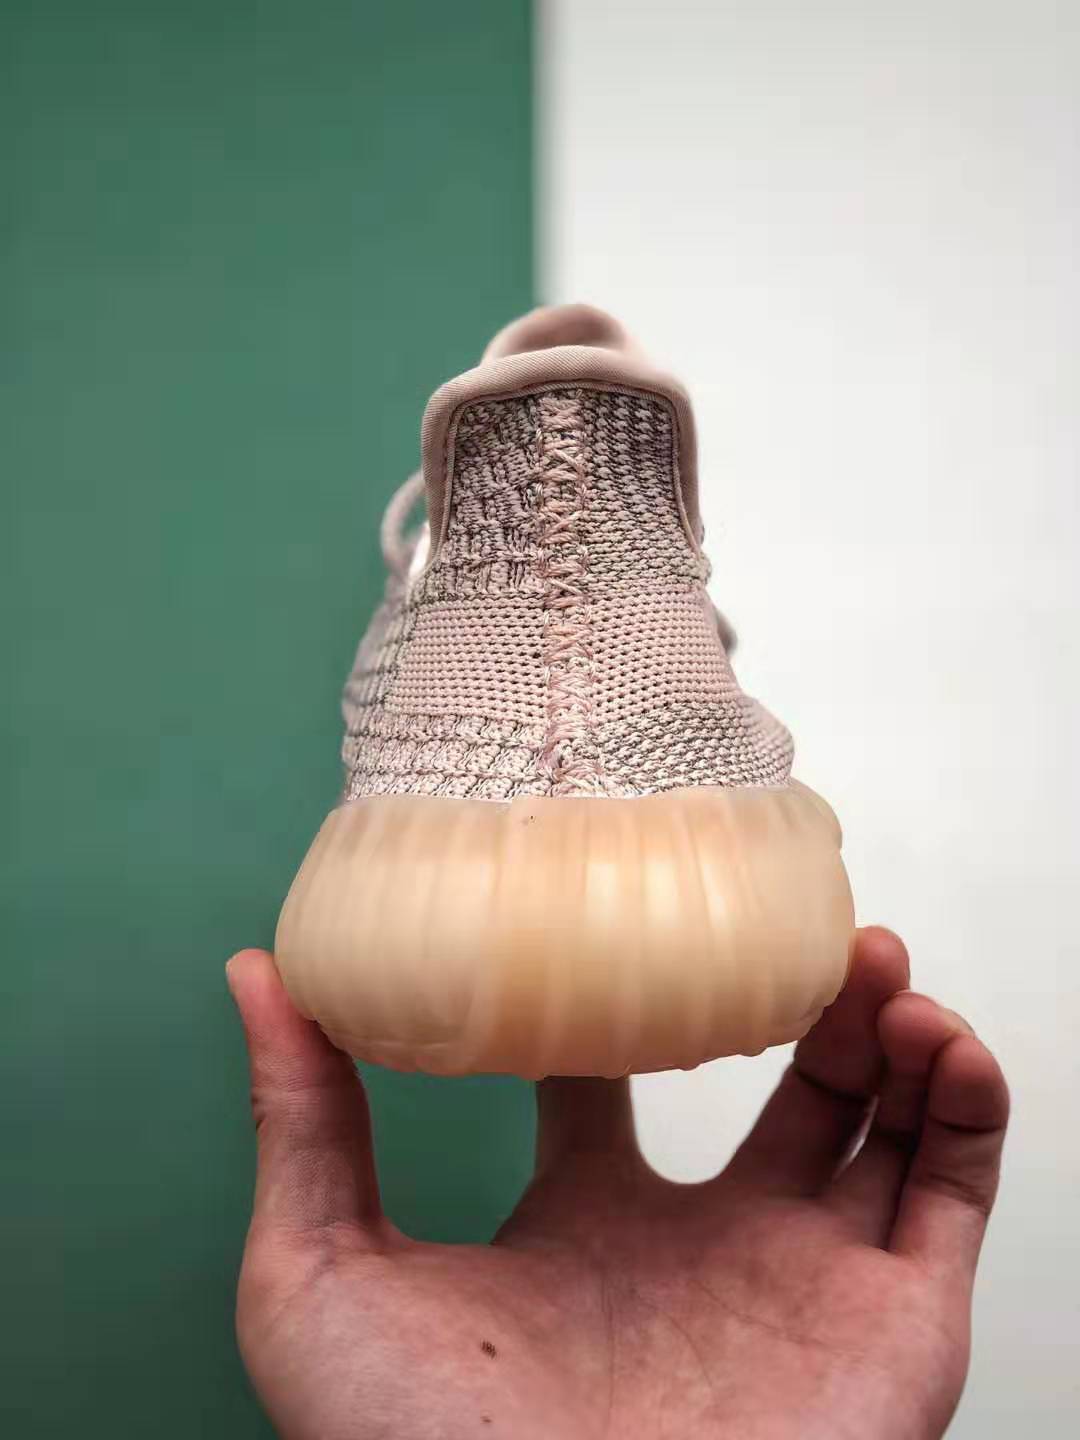 Adidas Yeezy Boost 350 V2 Synth Non-Reflective FV5578 - Exclusive Footwear for Every Sneaker Enthusiast